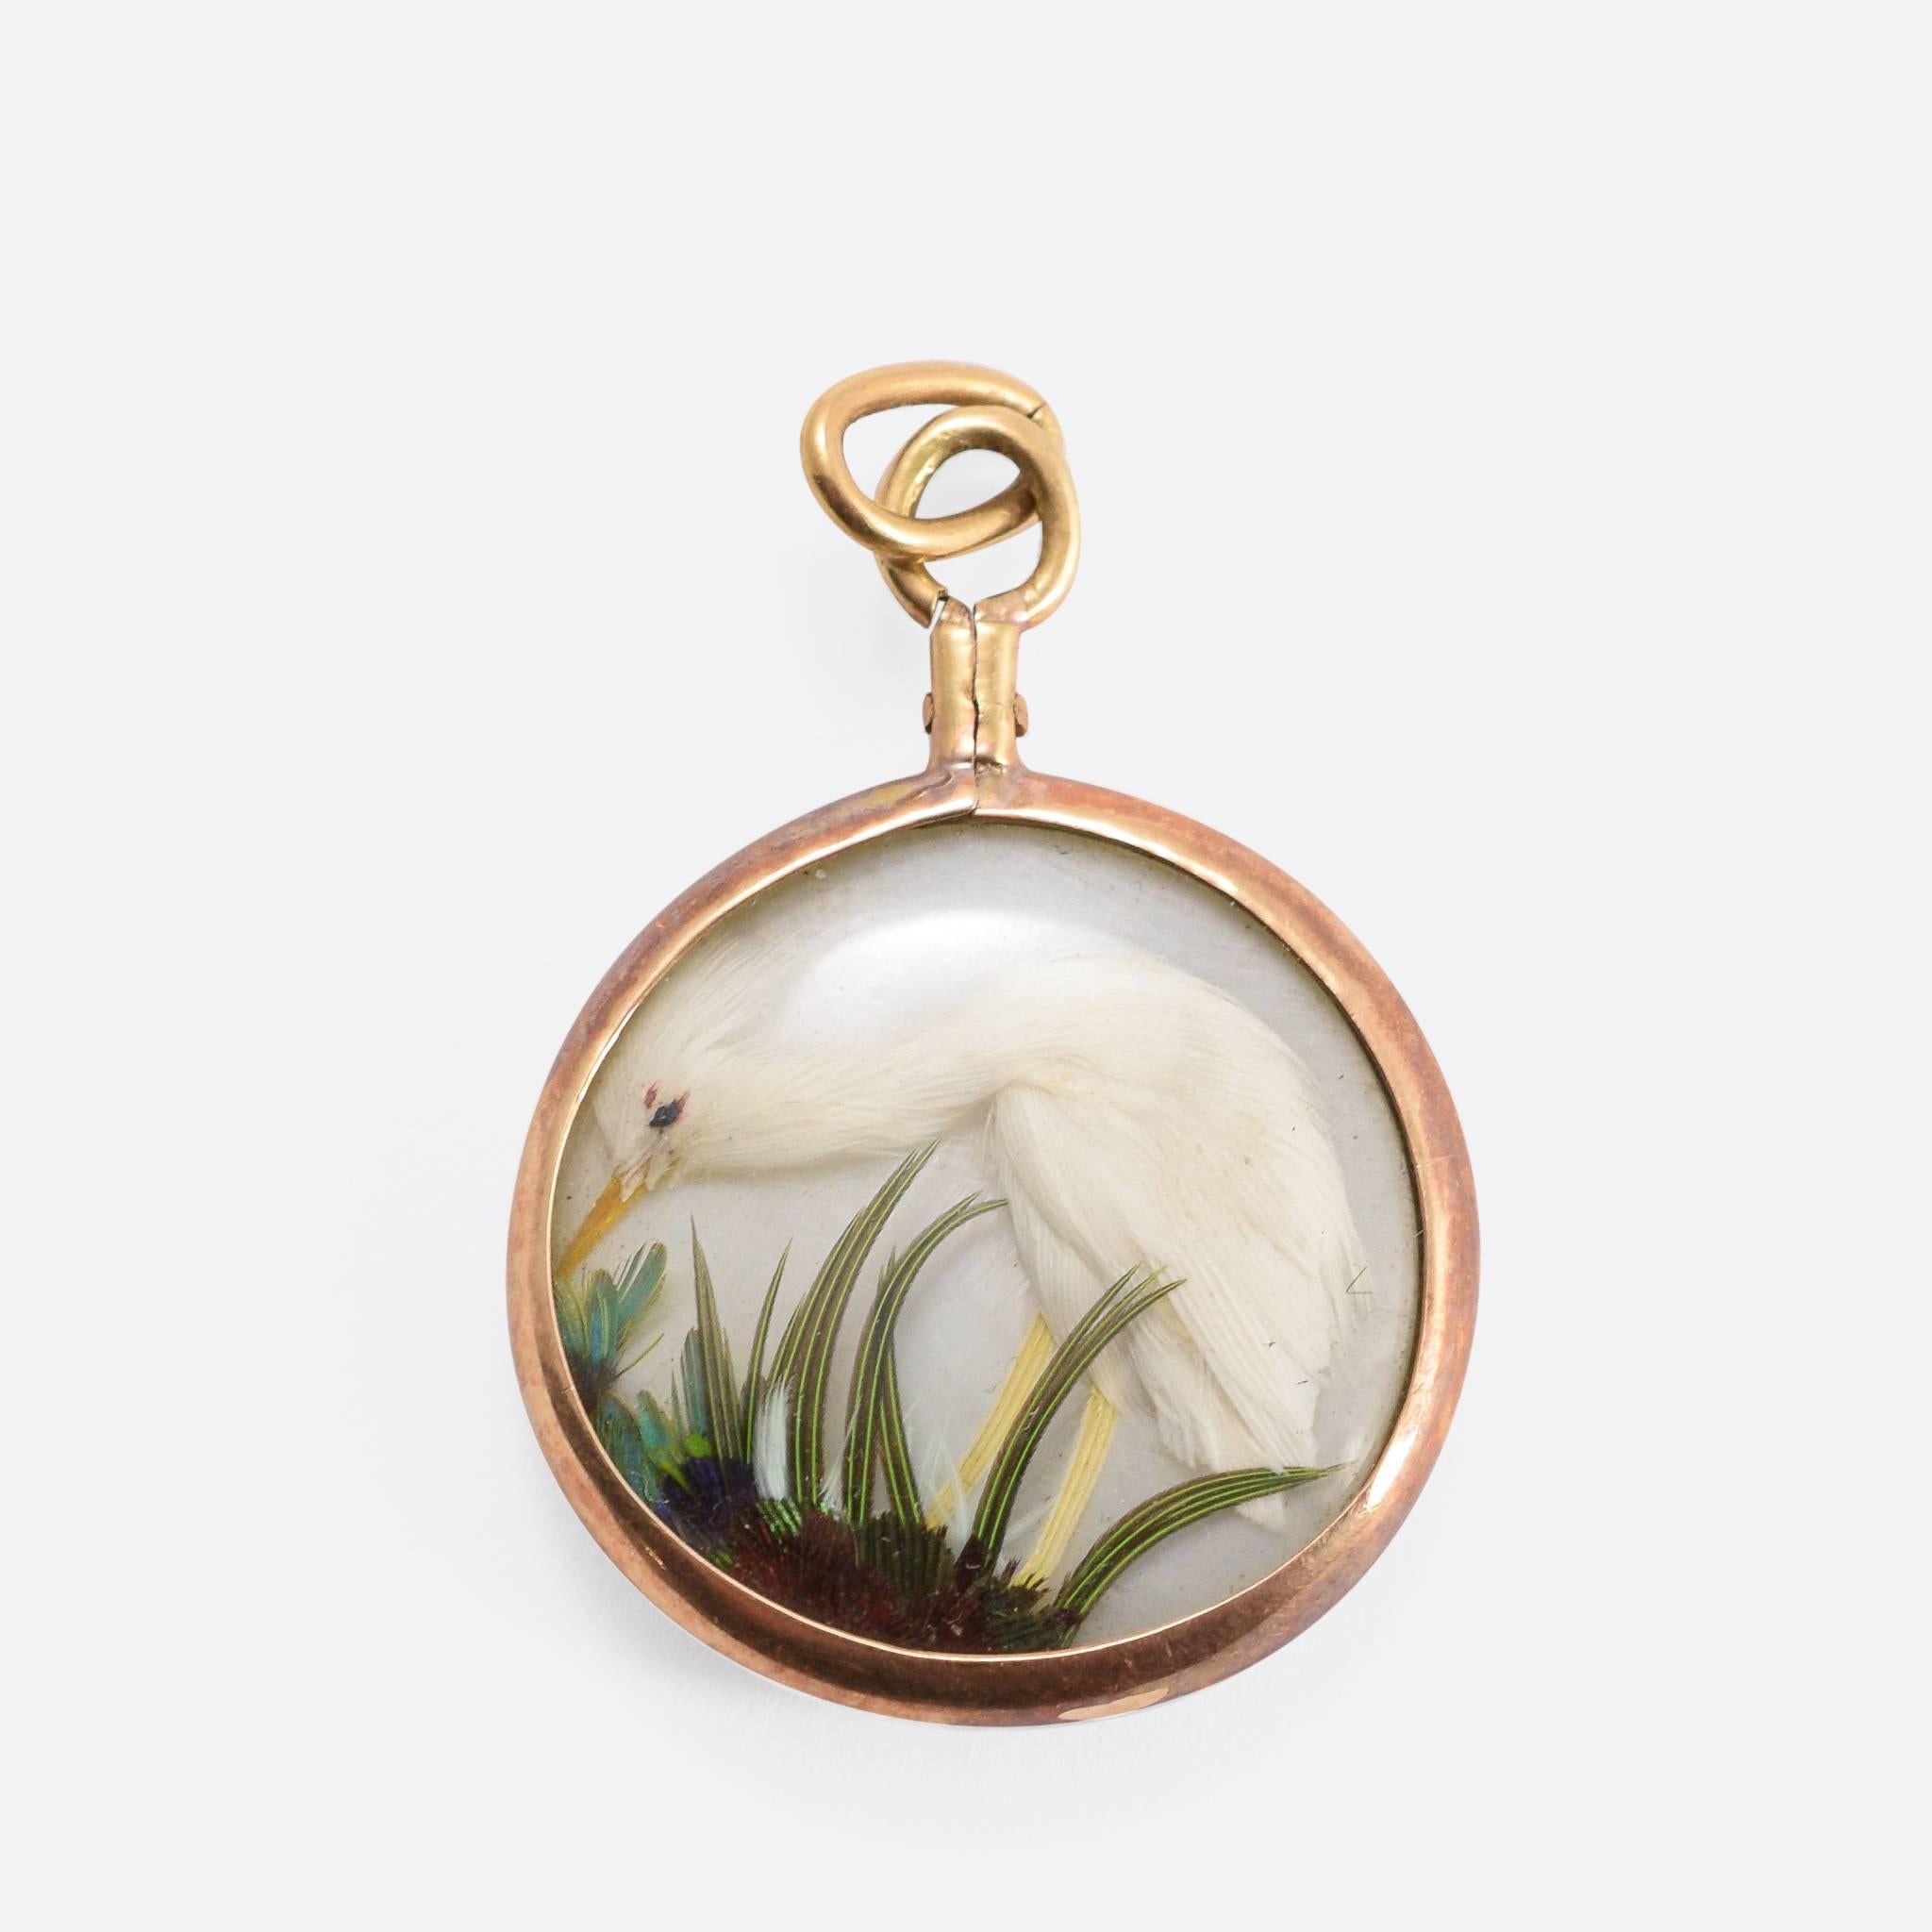 A cool and unusual Victorian pendant, c.1890. One each side, behind glass, is a little bird - seemingly made from the feathers of its real-life model. A glorious peacock on one side, and an elegant white egrit on the other. Modelled in 15ct gold. 